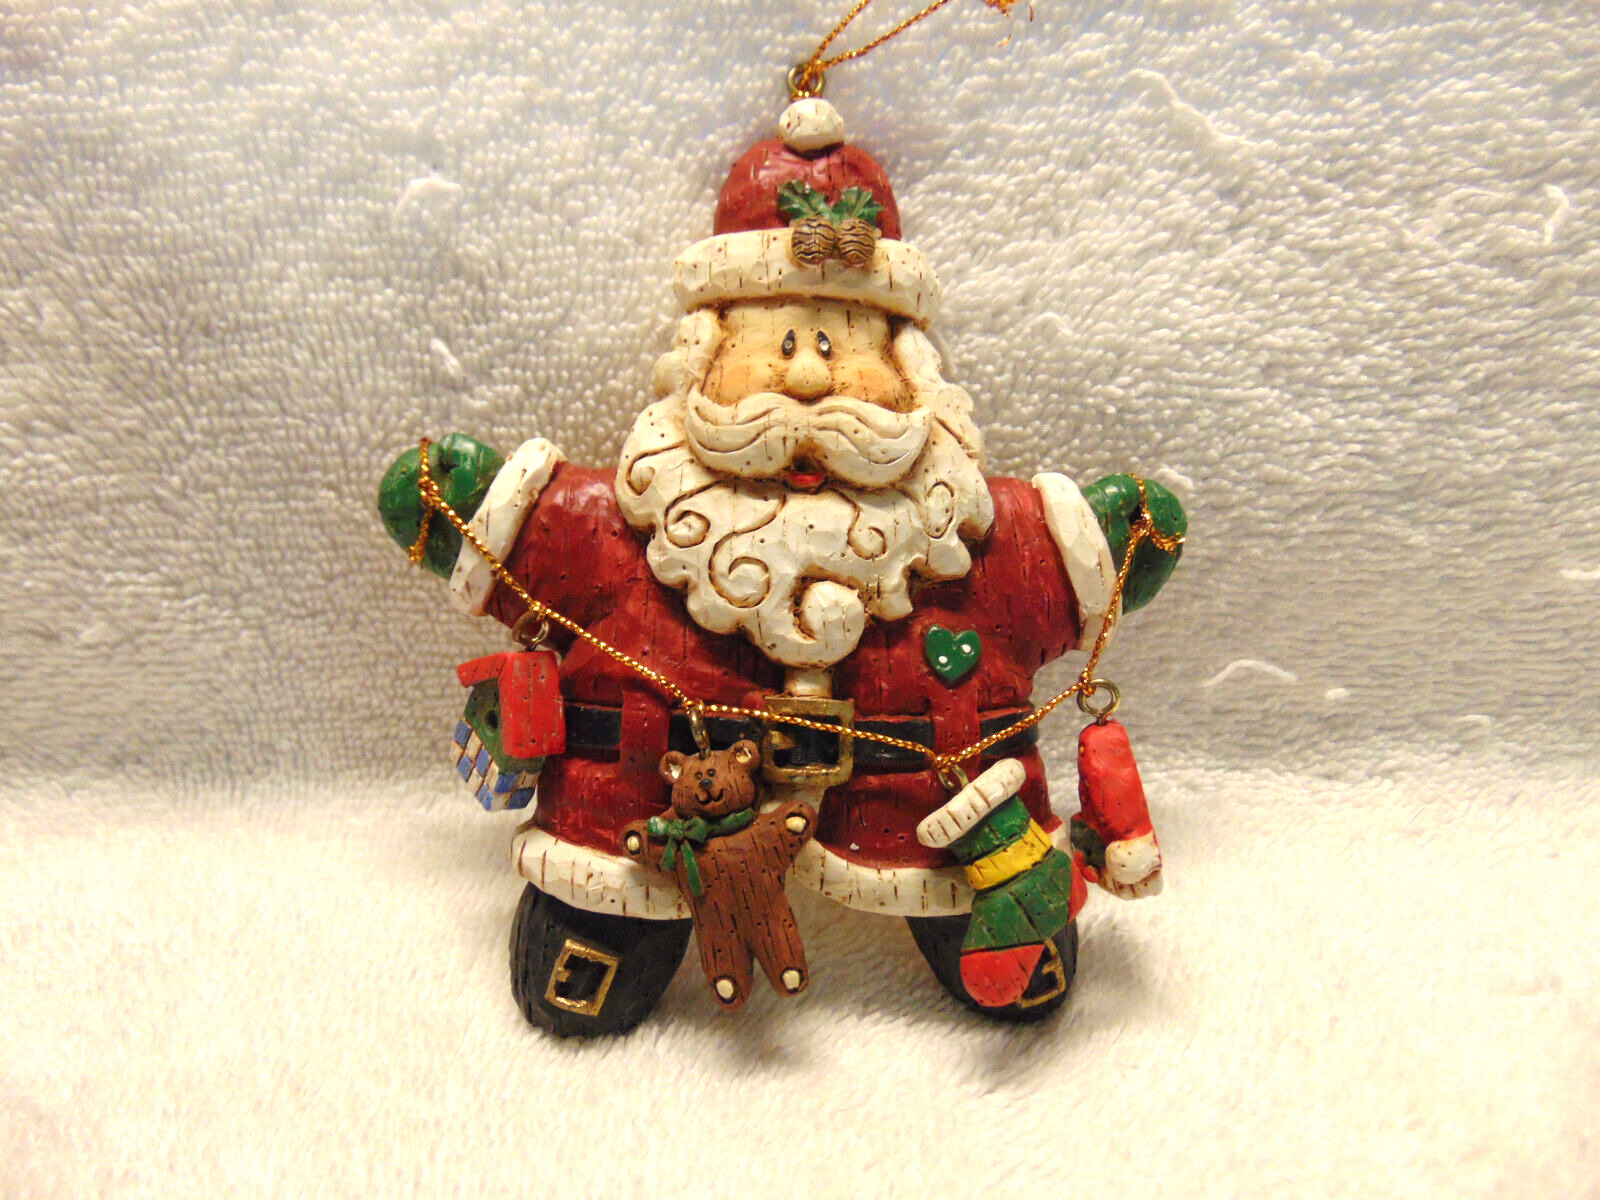 Vintage Collectible Painted Santa Claus Christmas Ornament Decoration 5 Inch